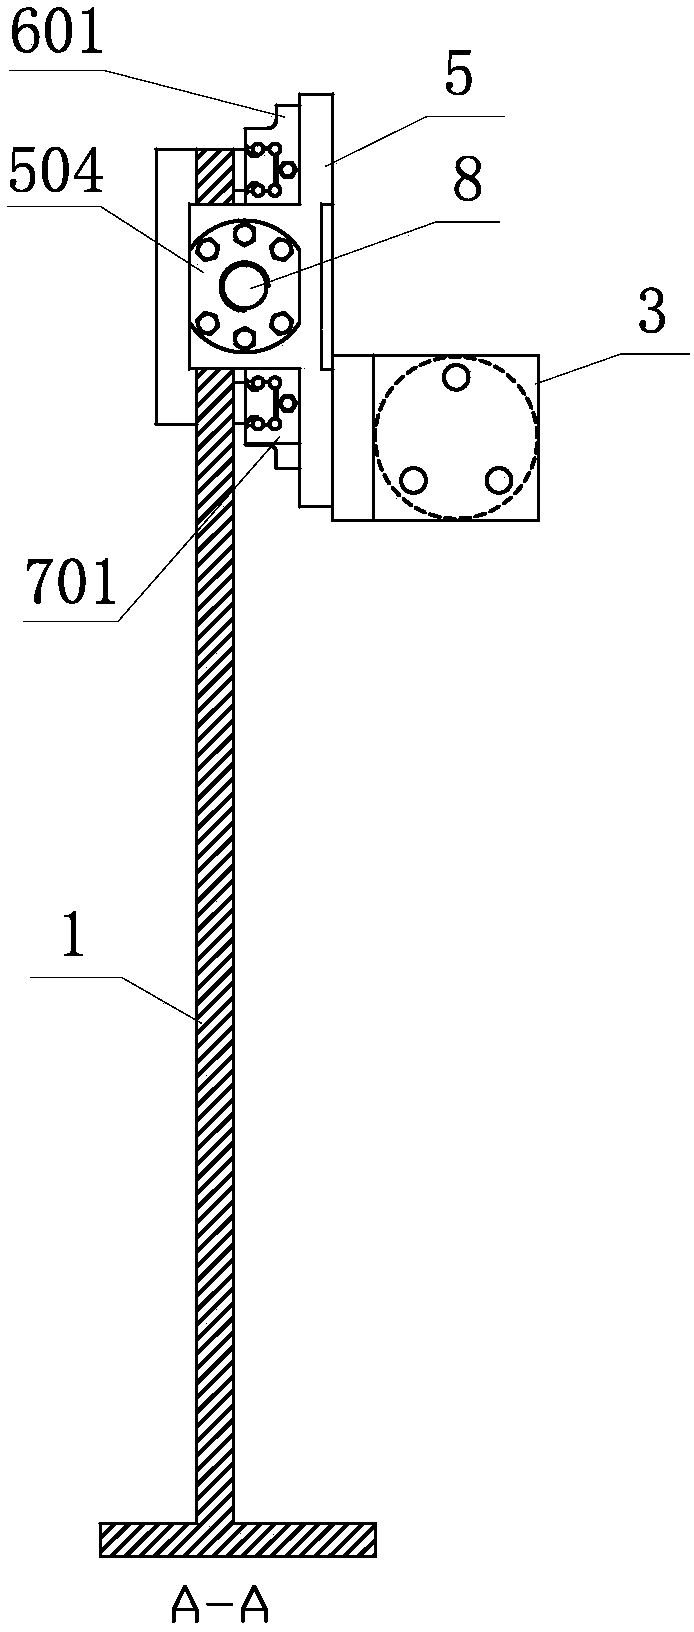 Linear array CCD based automatic welding seam tracking device and method